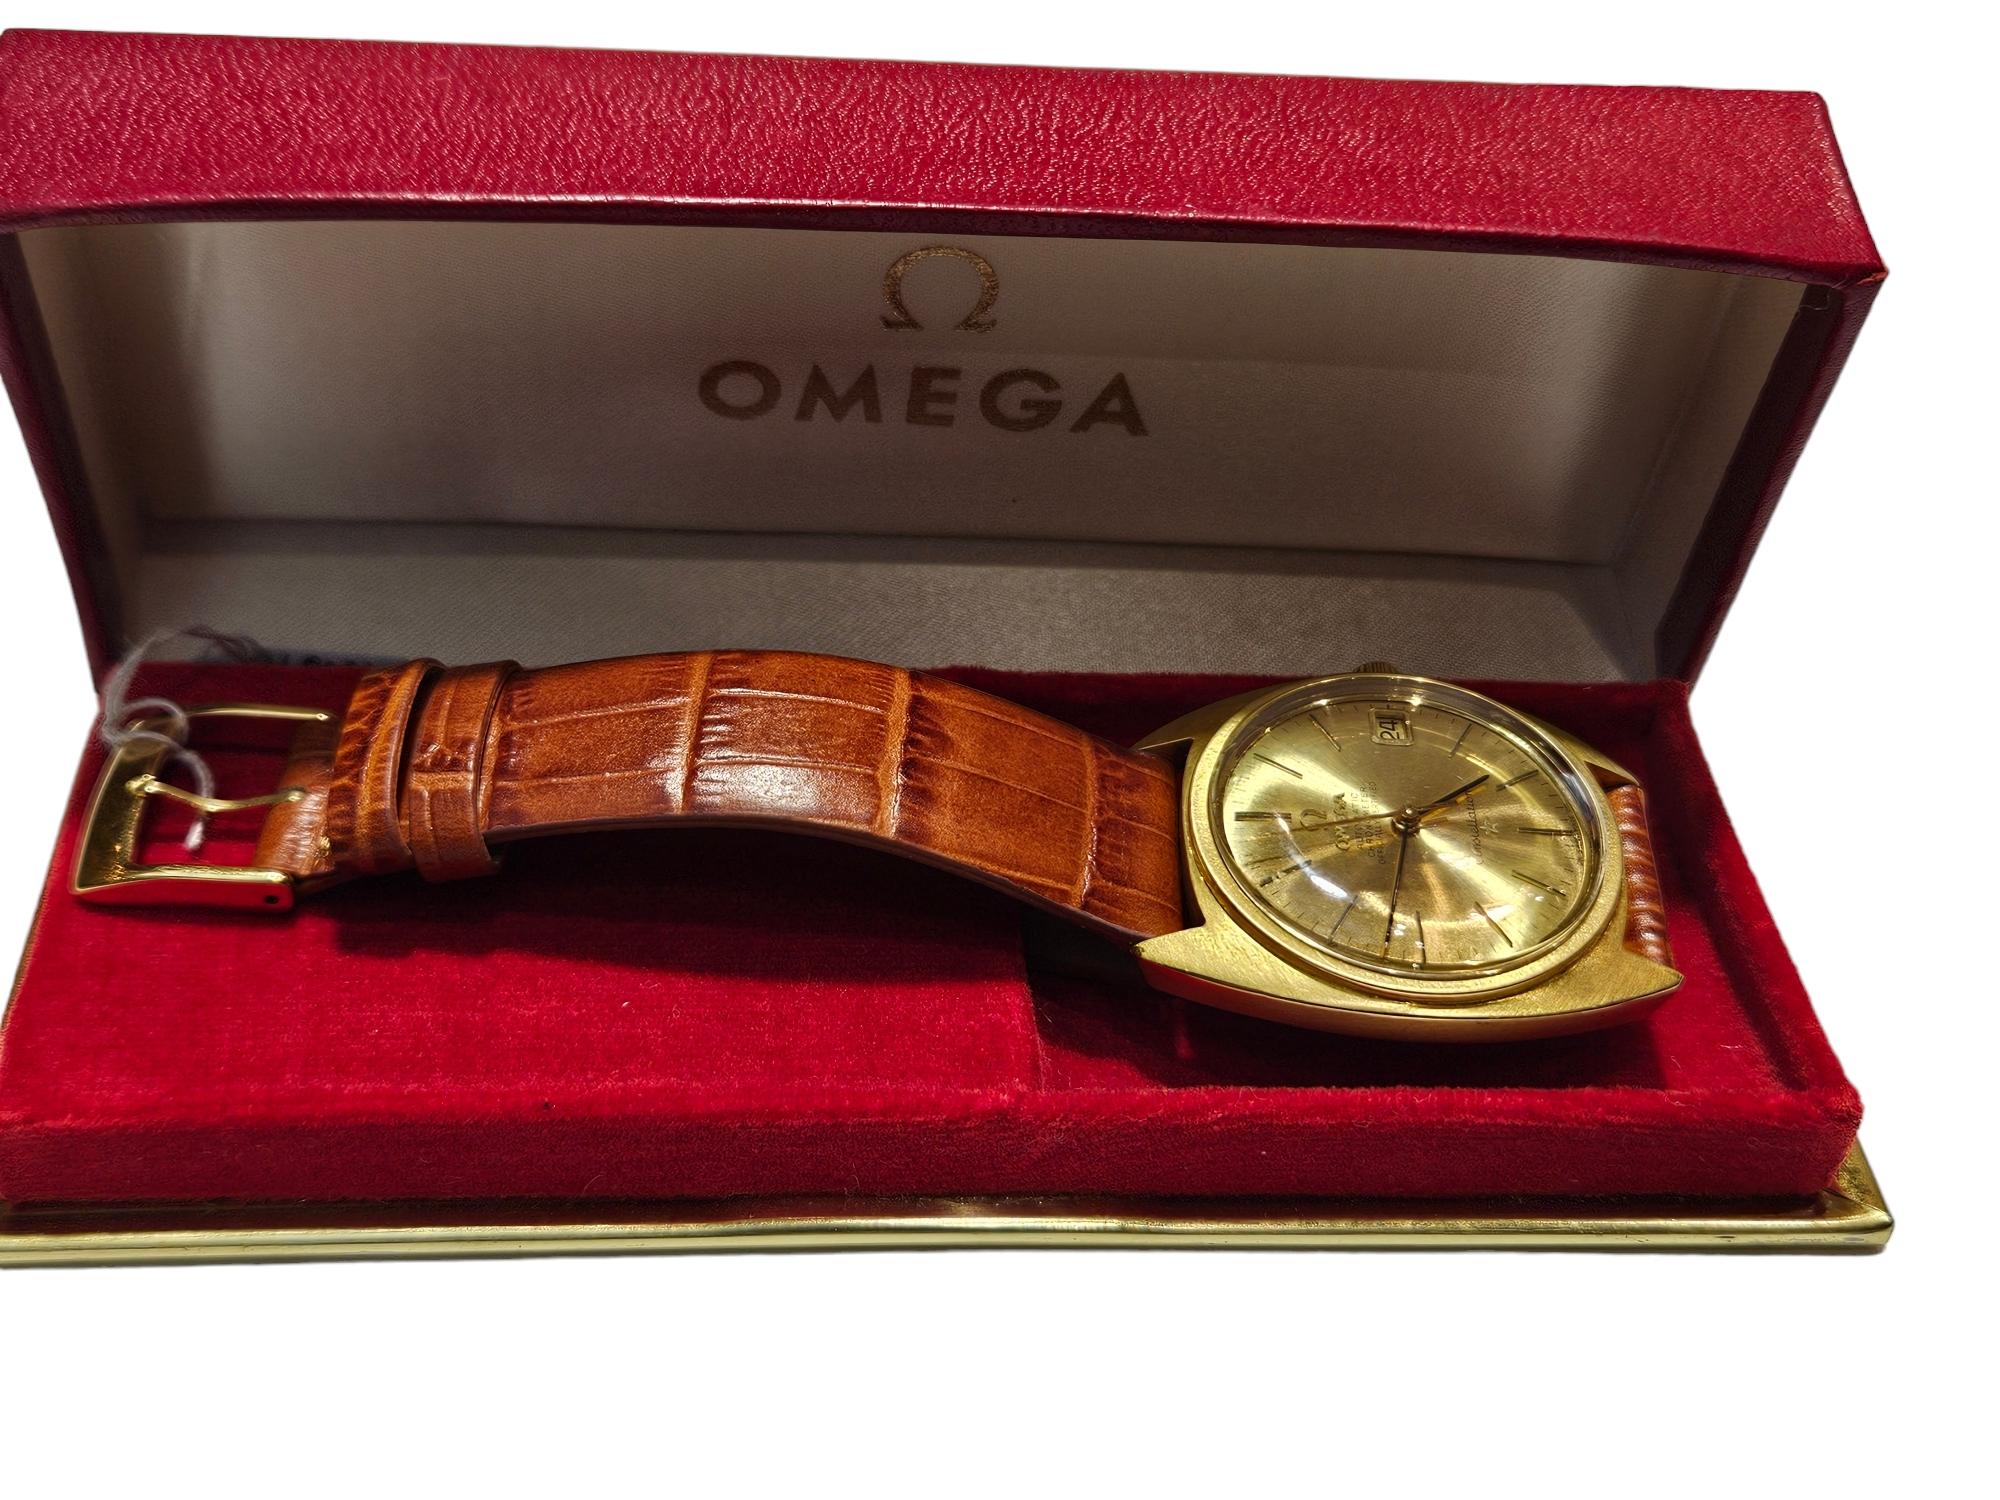 Omega Constellation Automatic Wristwatch, Cal.564, 35 mm, Ref 168.009 168.017 For Sale 9